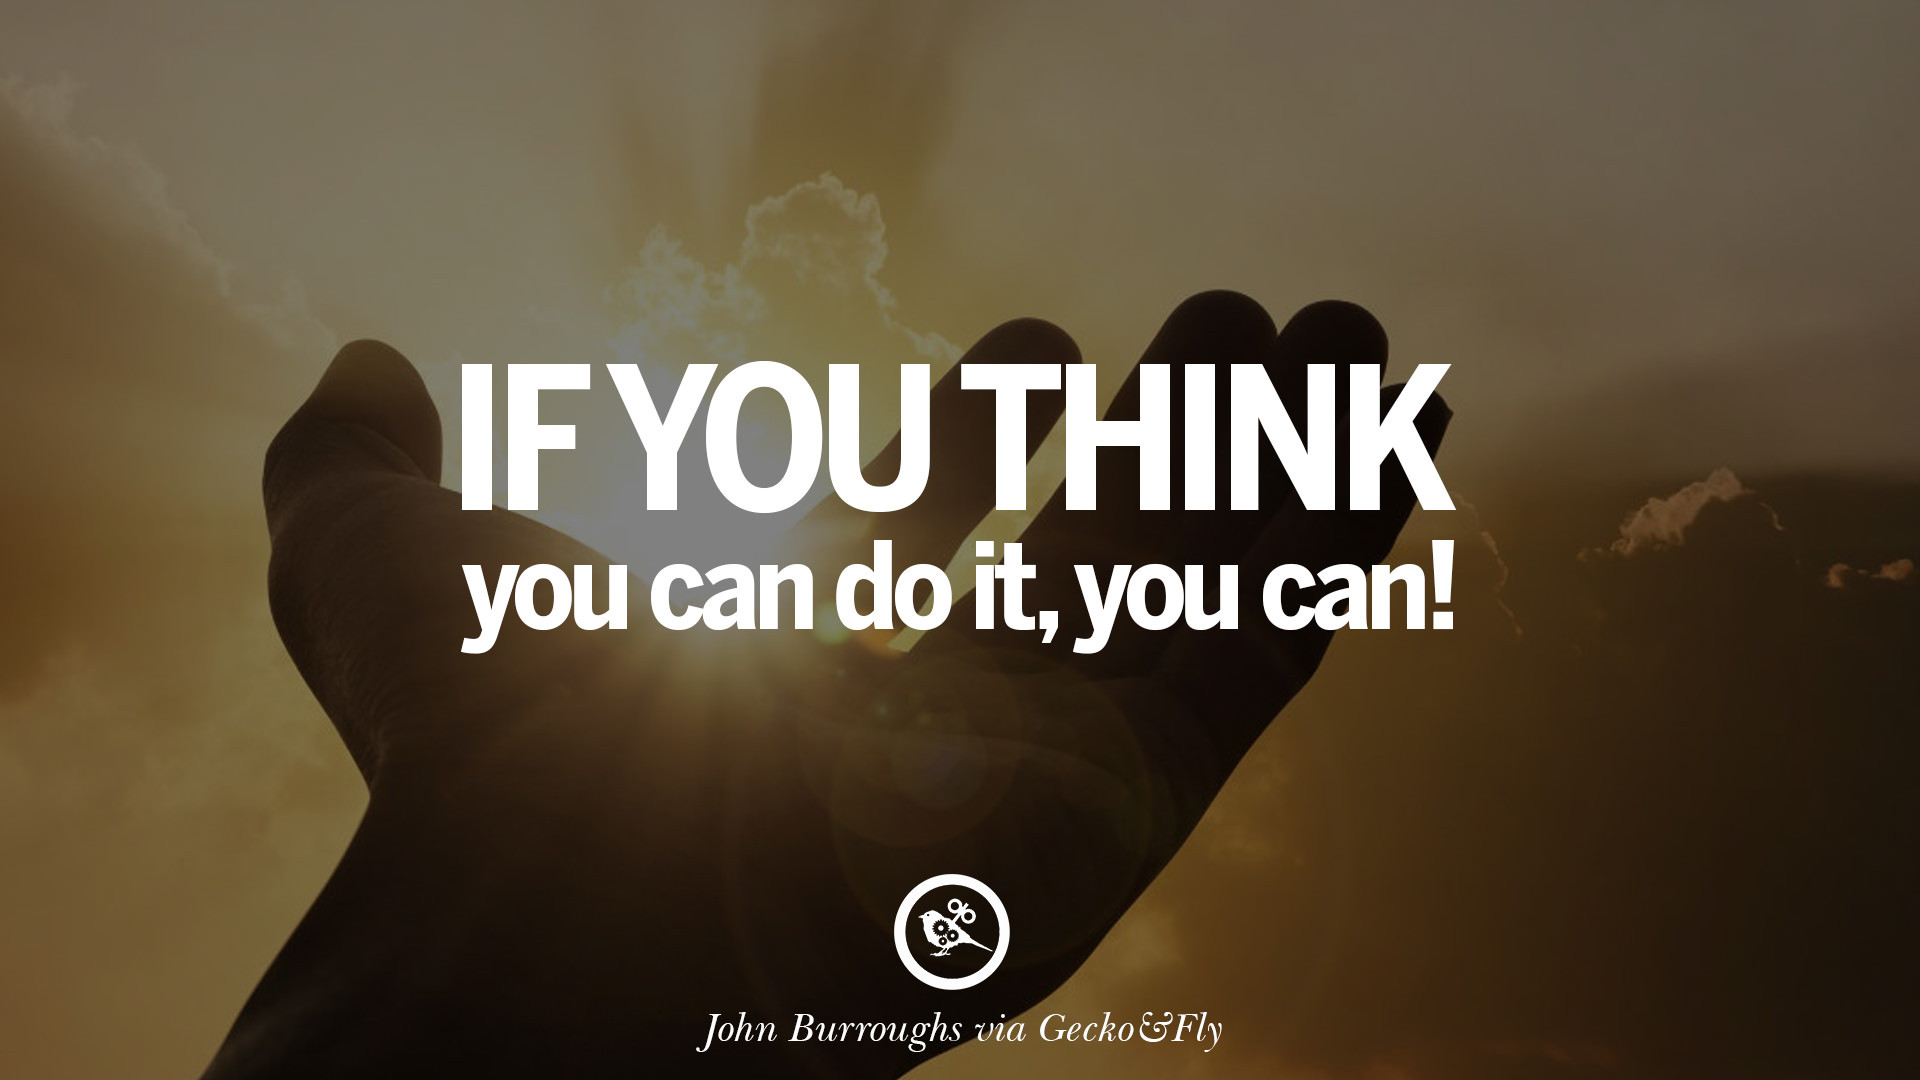 You Can Do It Motivational Quotes
 20 Encouraging and Motivational Poster Quotes on Sports